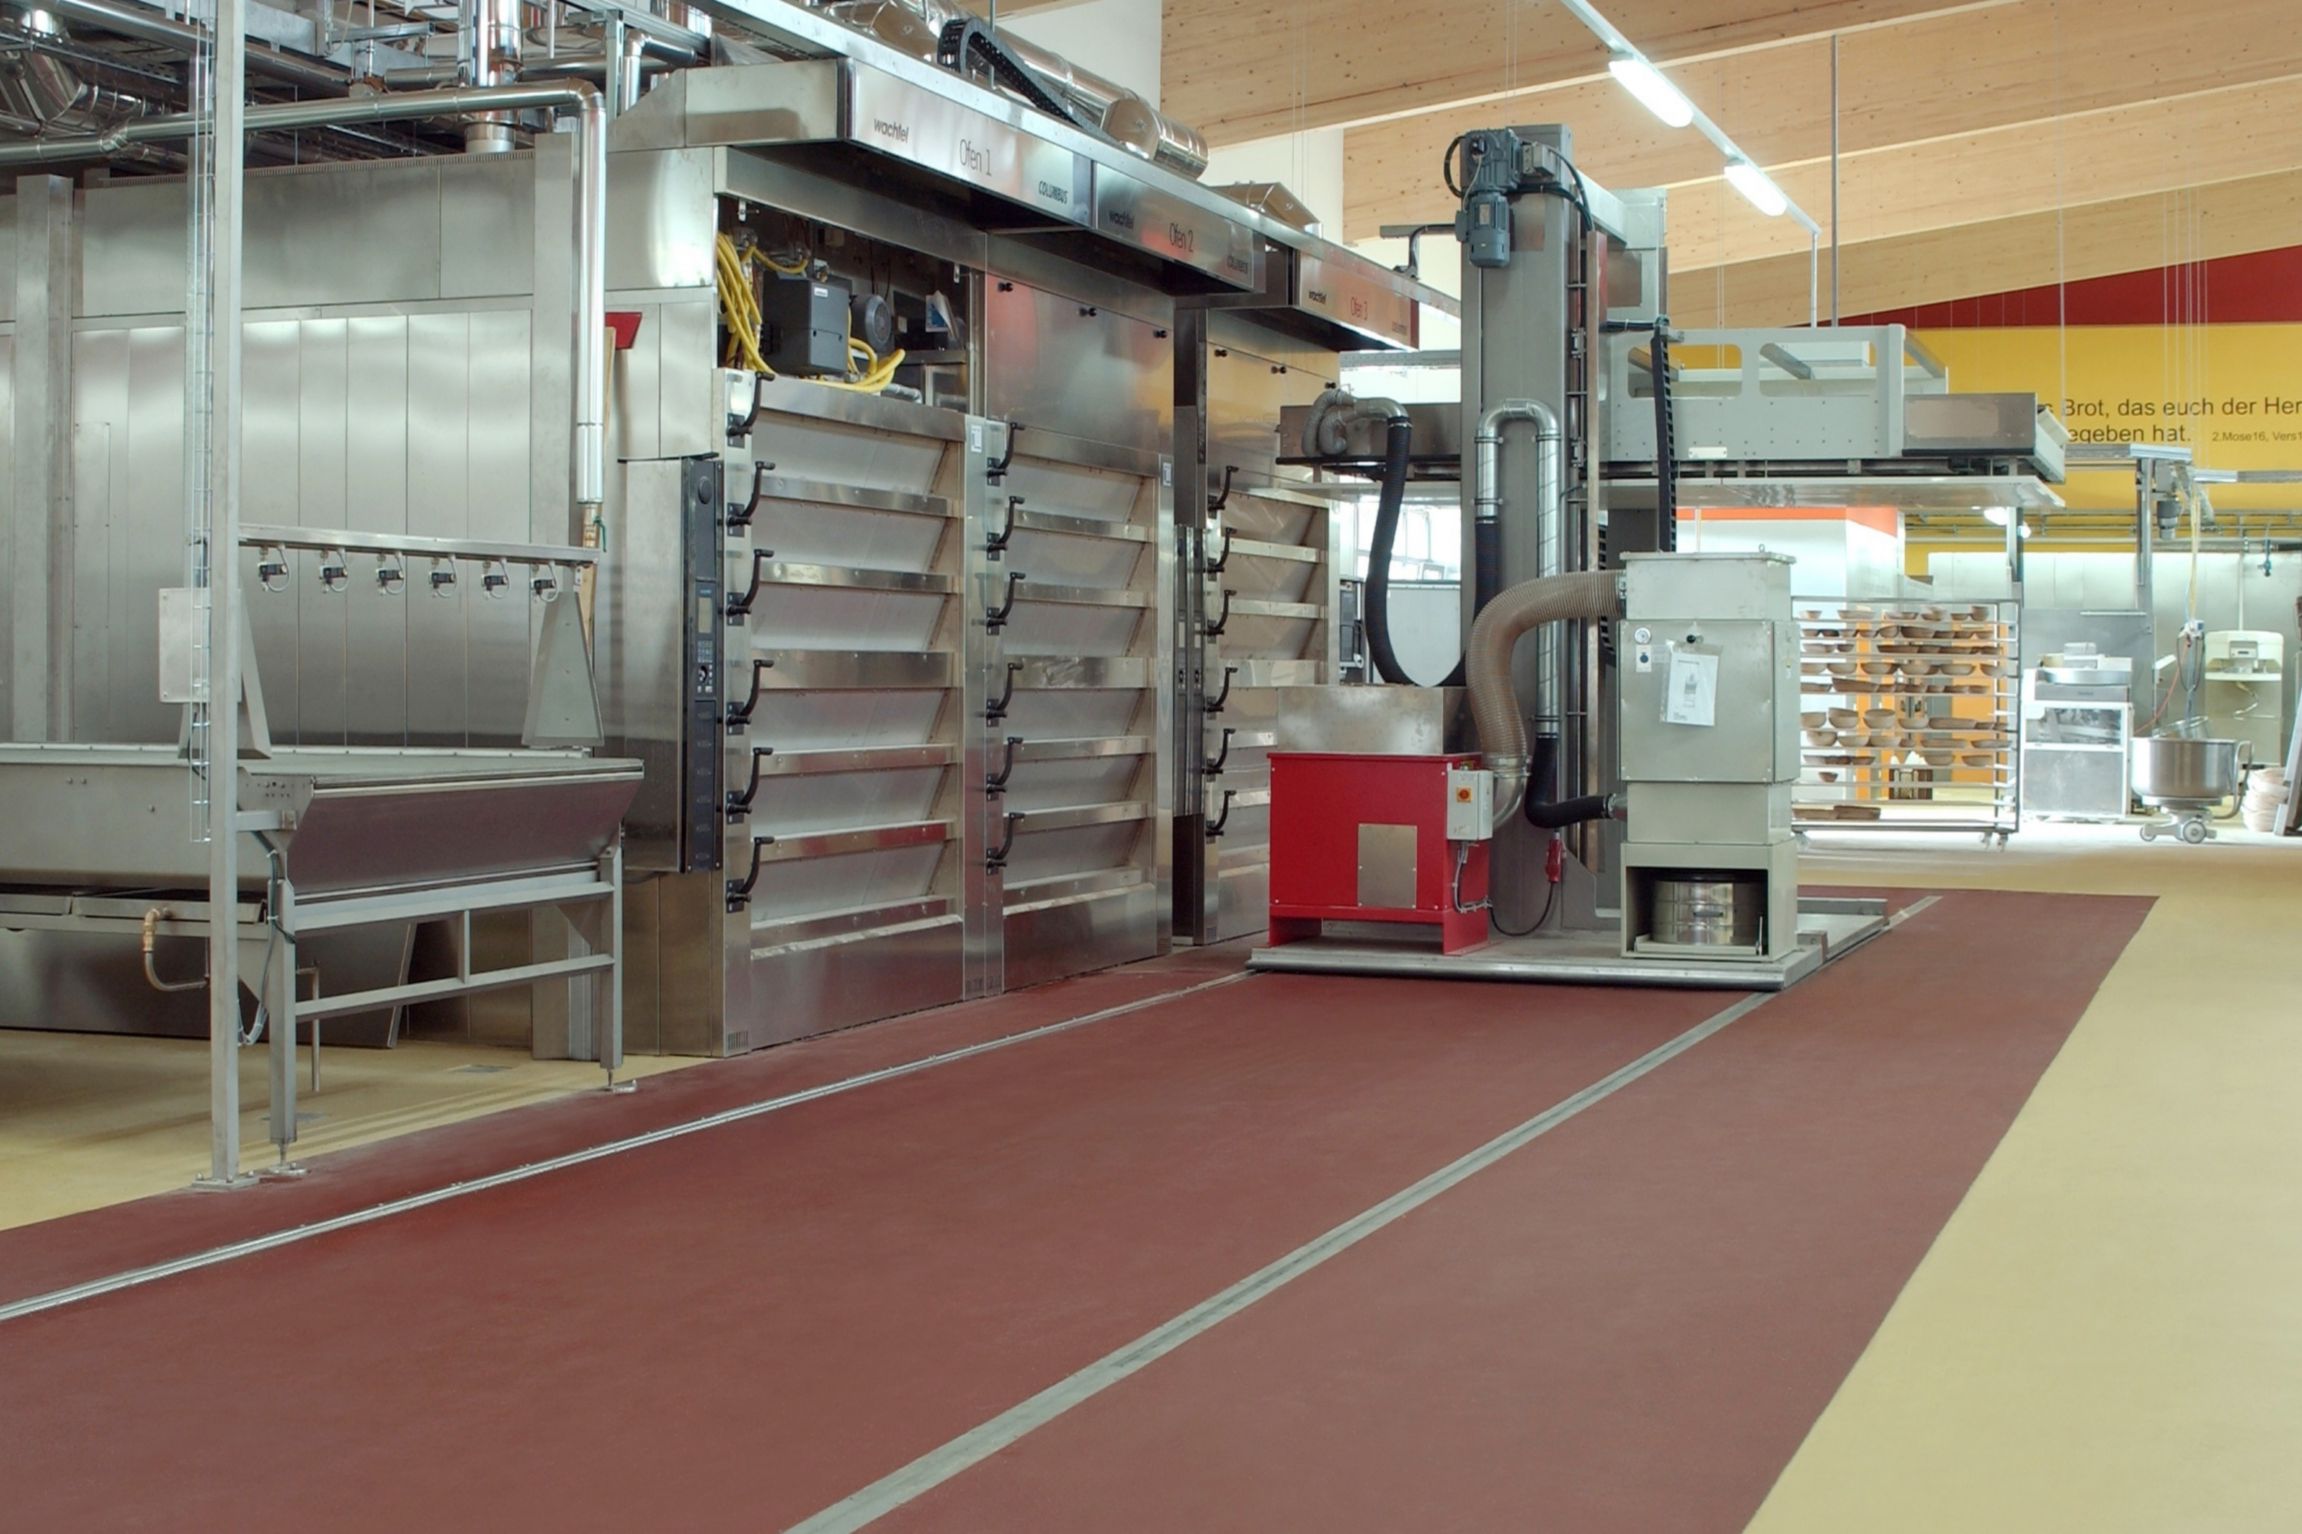 Hygenic flooring systems at Pilger Bakery in Germany